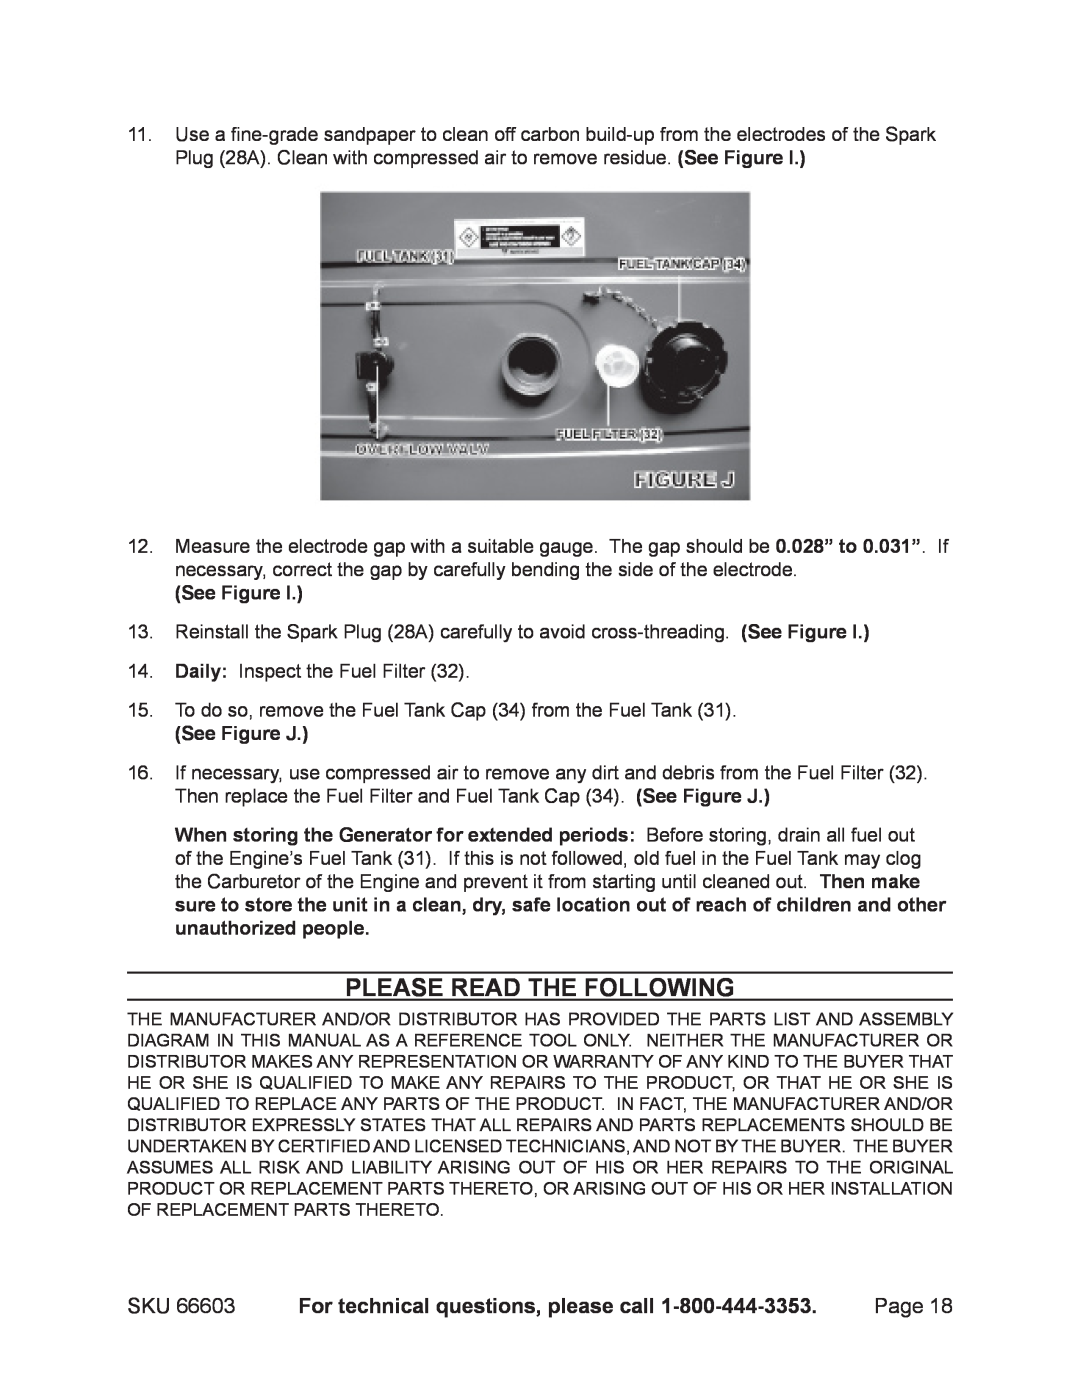 Chicago Electric 66603 manual Please Read The Following, For technical questions, please call, See Figure J 